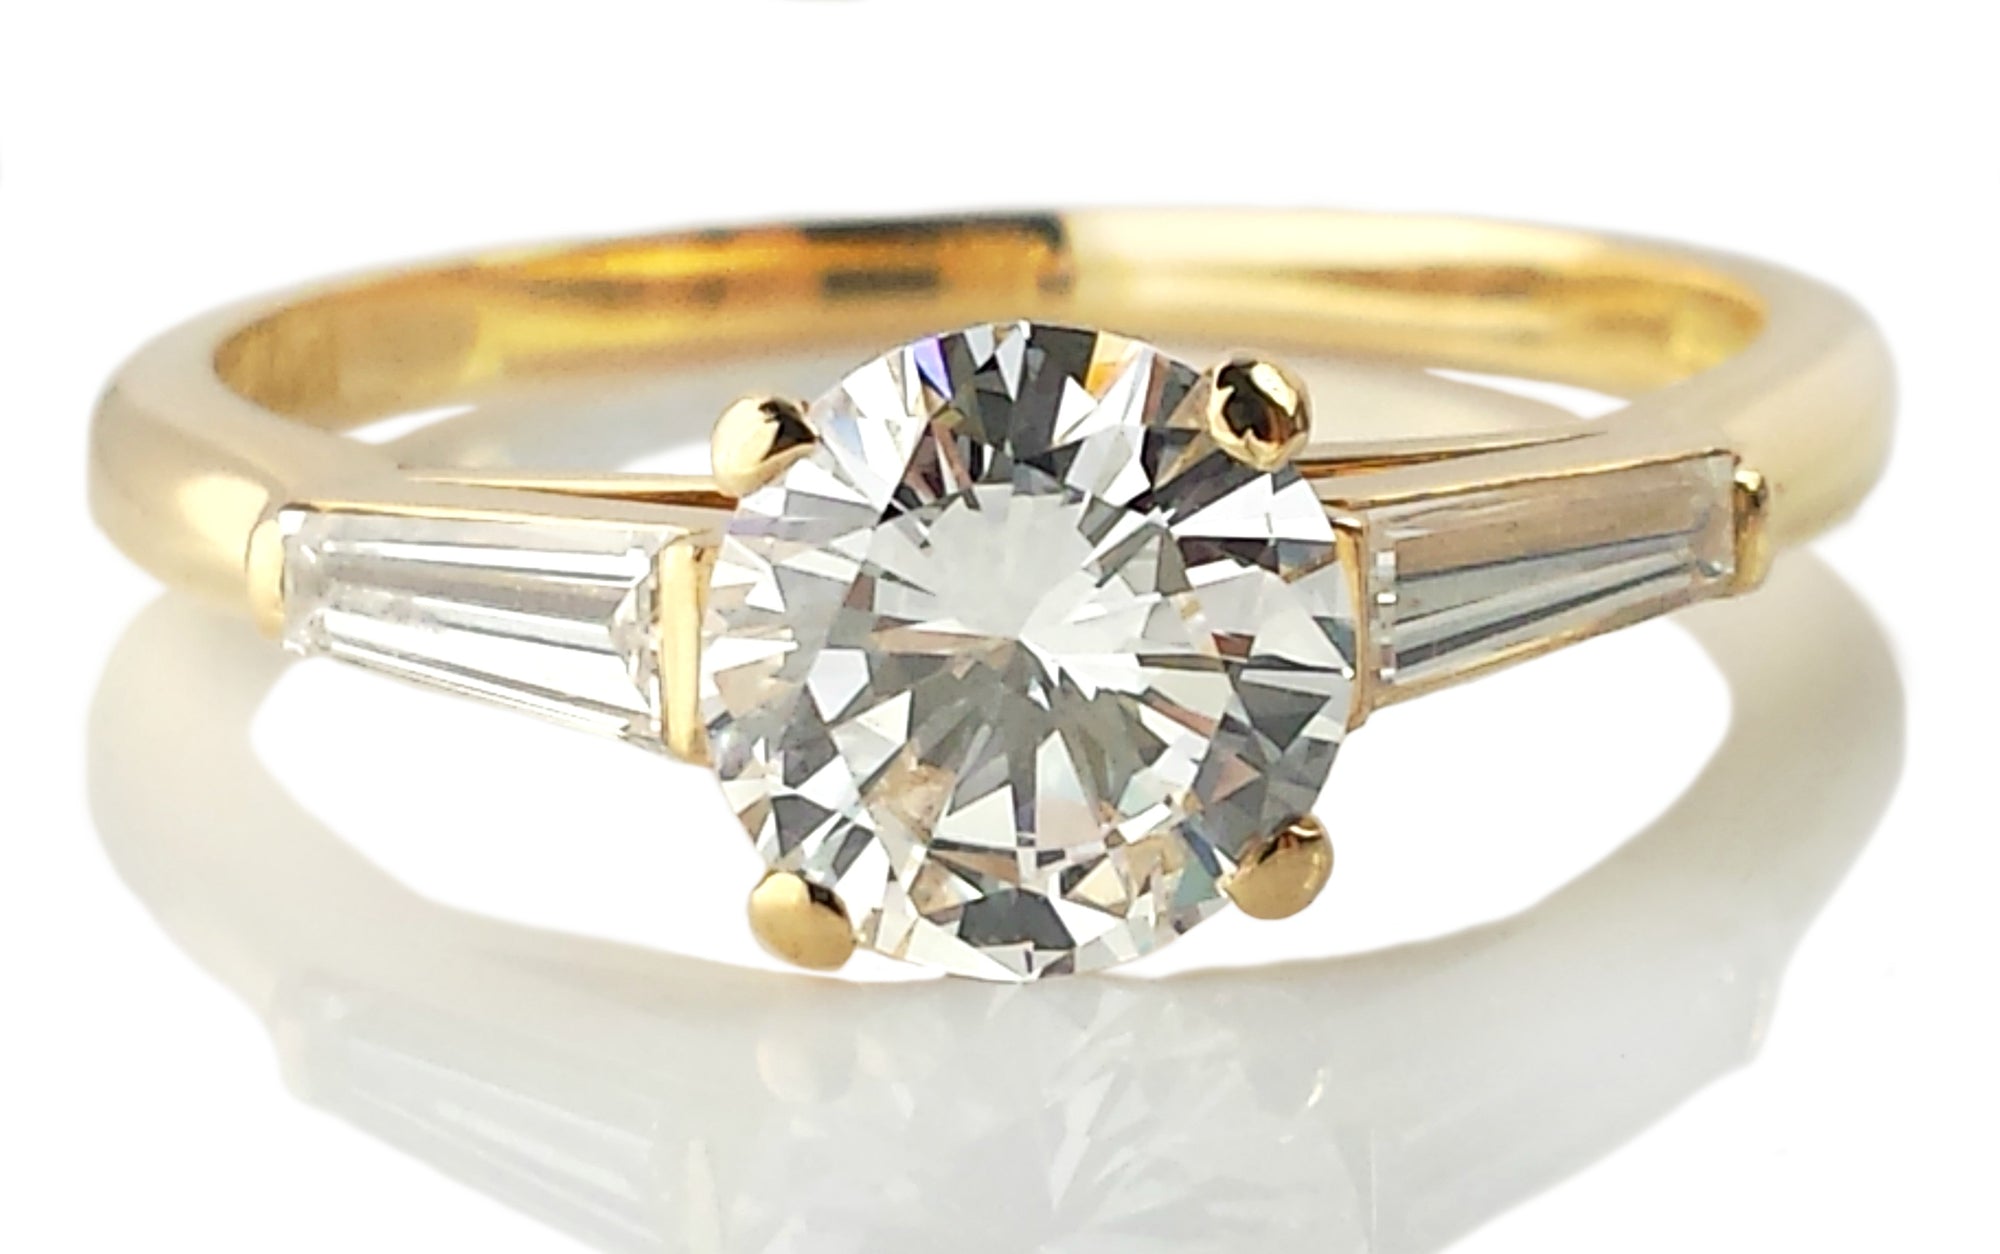 Vintage Cartier 1.01ct D/VVS2 Round Brilliant & Tapered Baguette Diamond Engagement Ring in 18K Gold